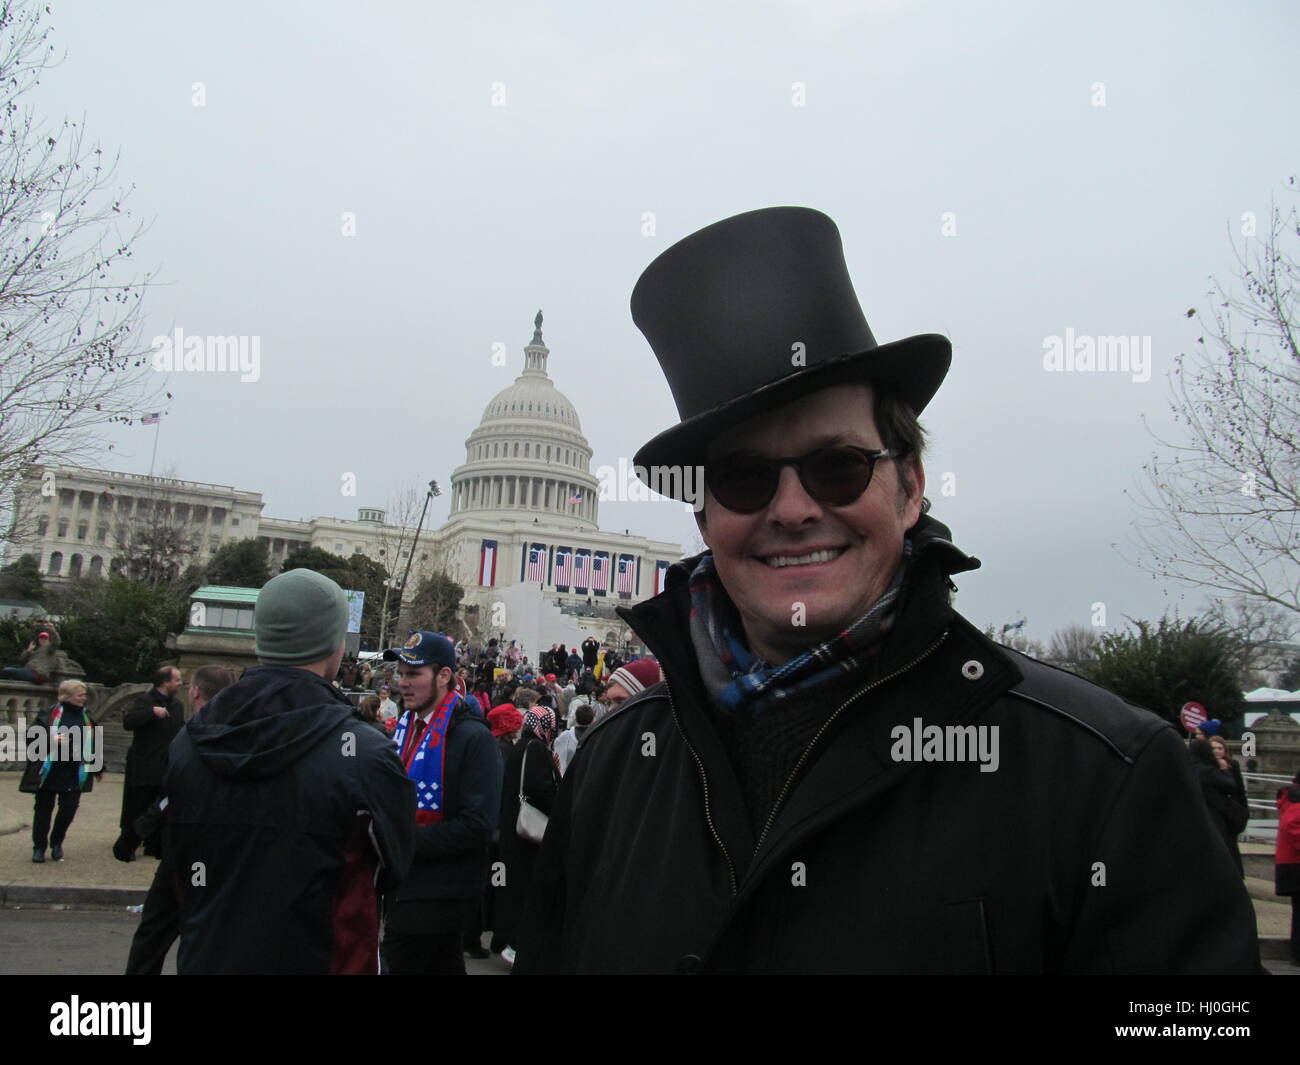 Erik Laykin, trump supporter, is seen on 20 January 2017 in Washington, USA, with a collapsible top hat, a beaver-fur Chestergate from 1880. Hundreds of thousands of Americans gathered to watch an unlikely political figure - former reality TV star Donald Trump - become the 45th president of the United States. Photo: Frank Fuhrig/dpa Stock Photo